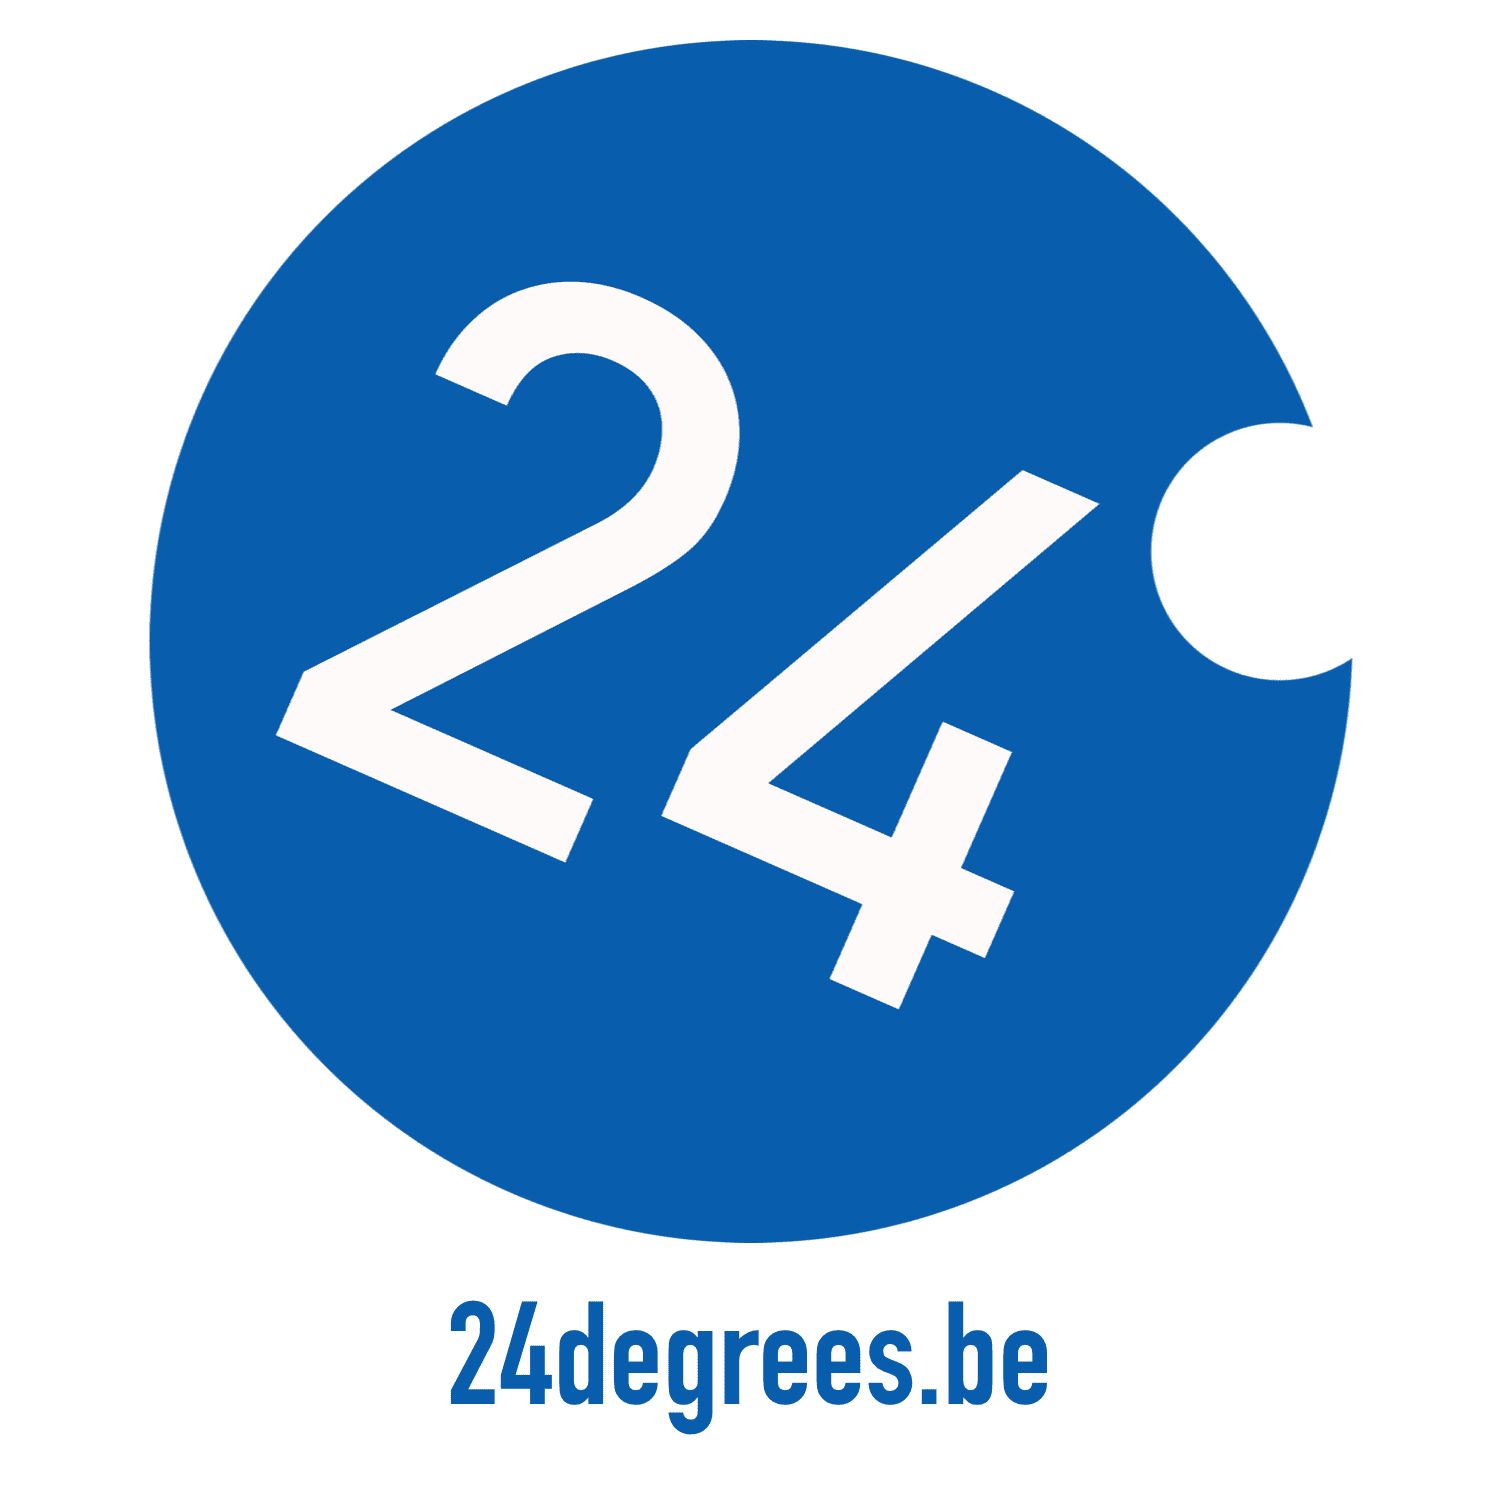 The logo of 24degrees